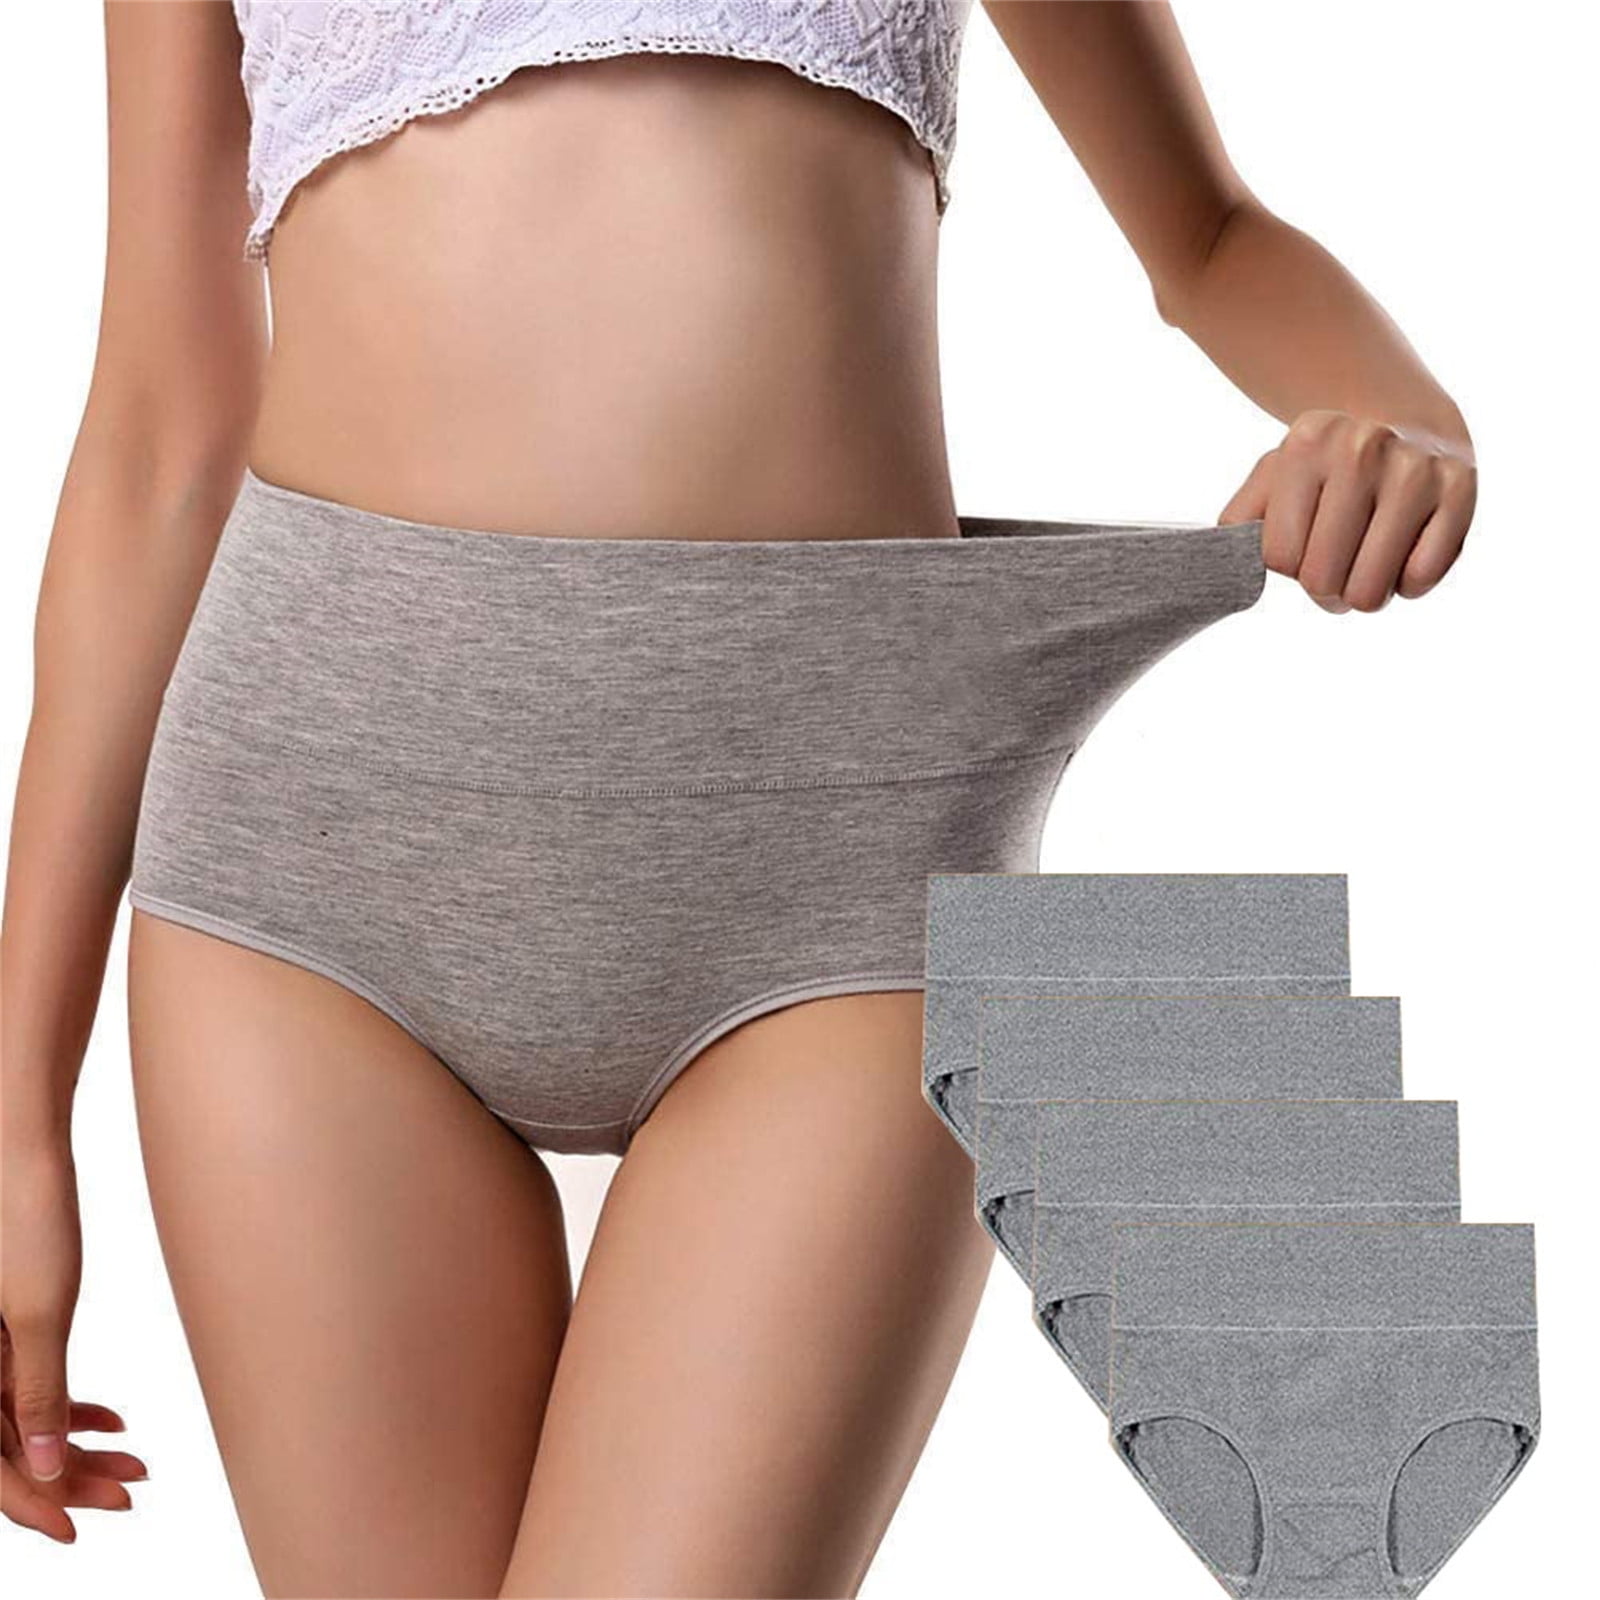 LEEy-world Women'S Lingerie Waist Of Pure Cotton Underwear Women Contracted  Comfortable Breathable Fork Girls Briefs,F